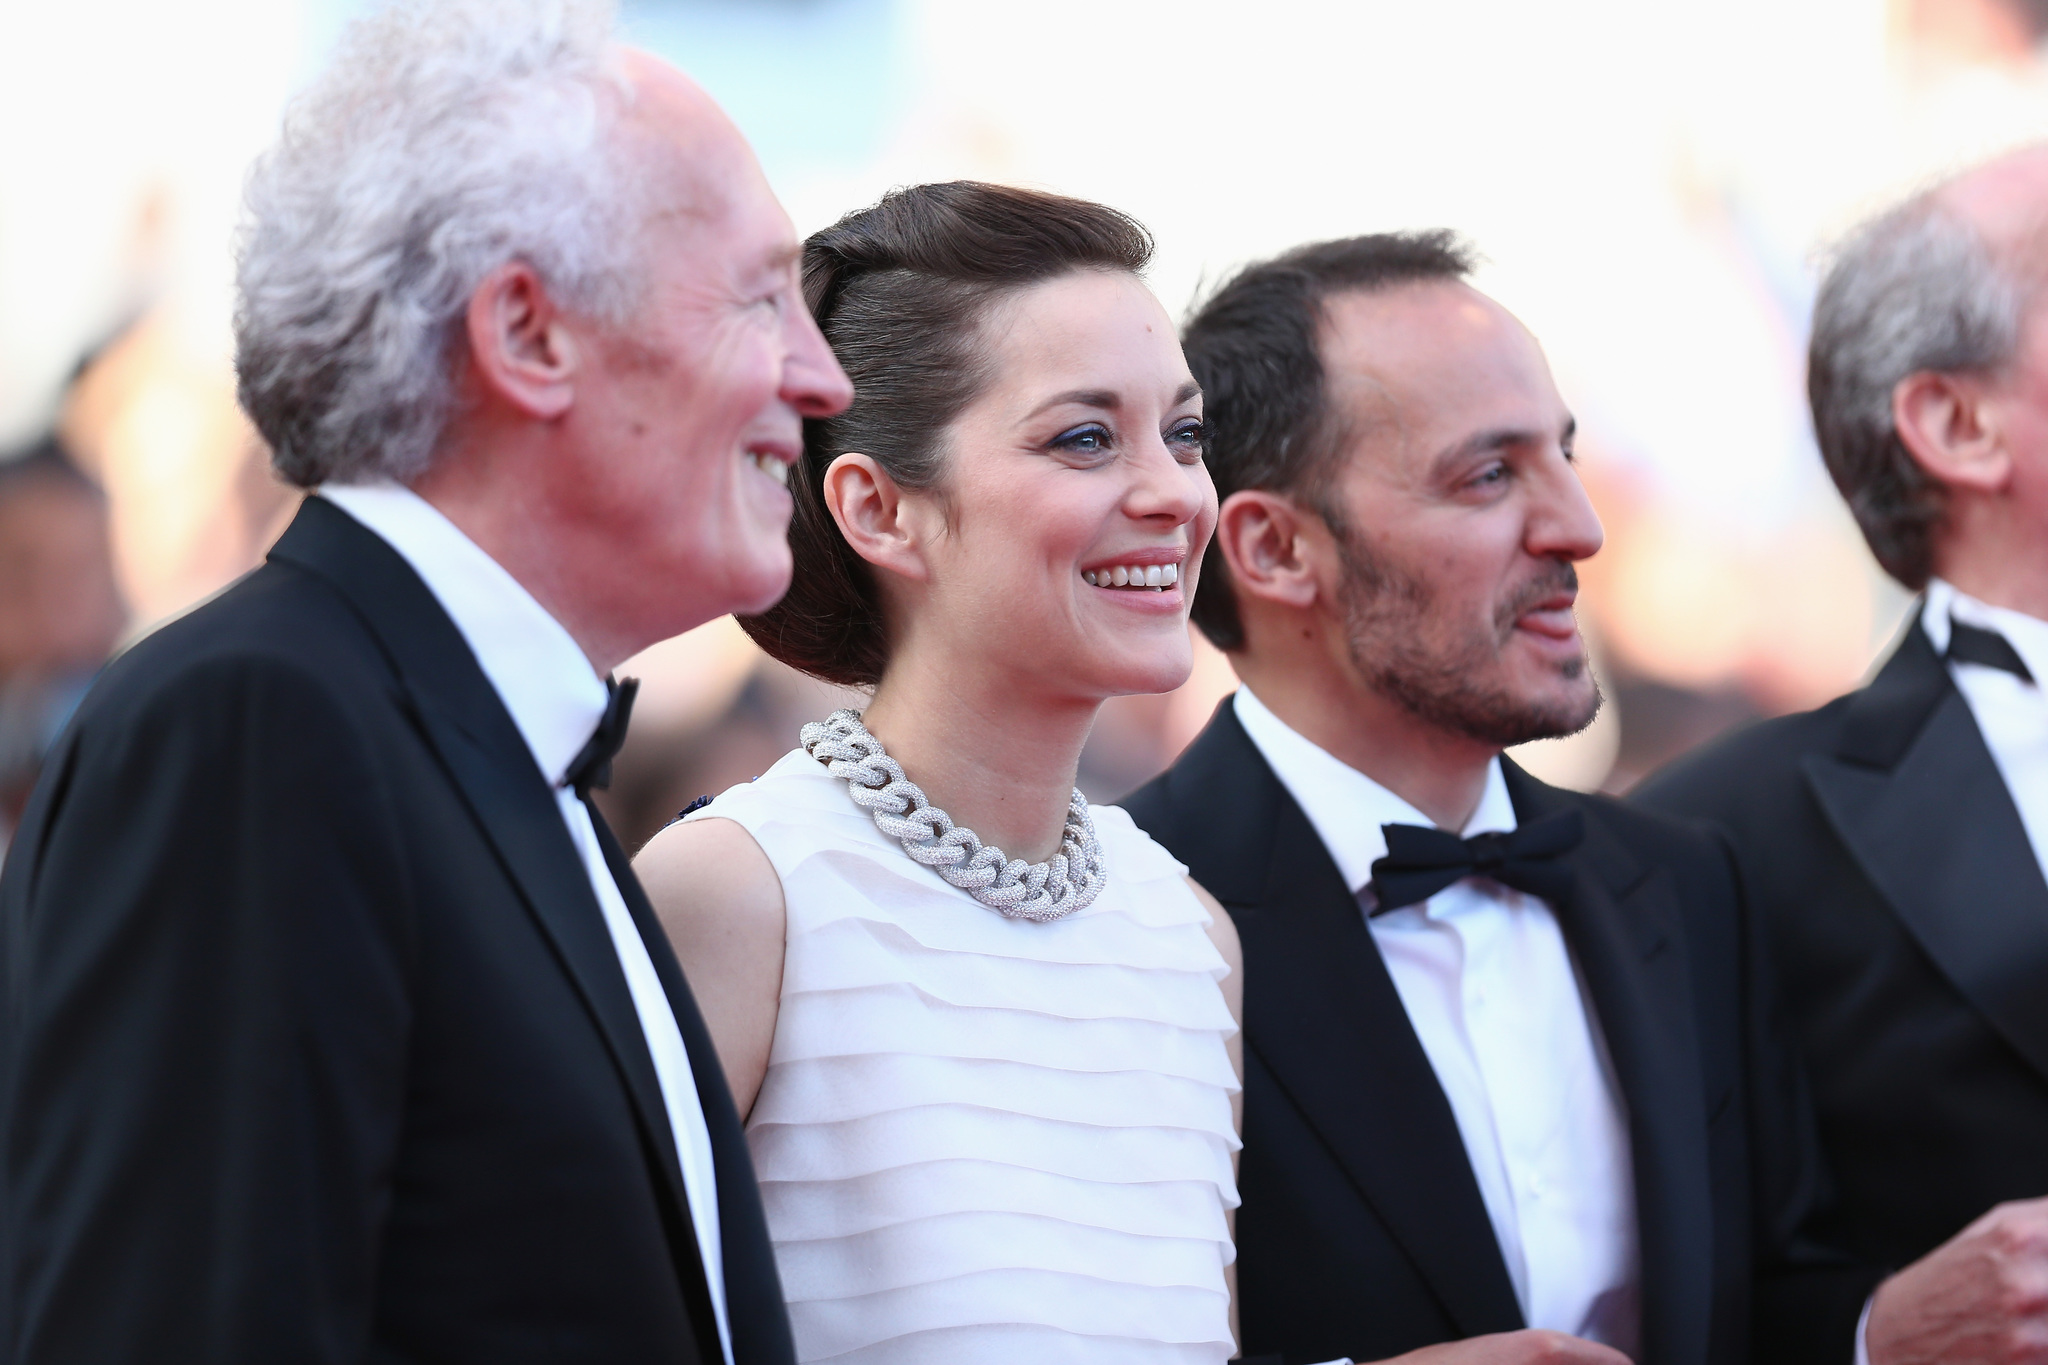 Marion Cotillard, Jean-Pierre Dardenne and Fabrizio Rongione at event of Deux jours, une nuit (2014)